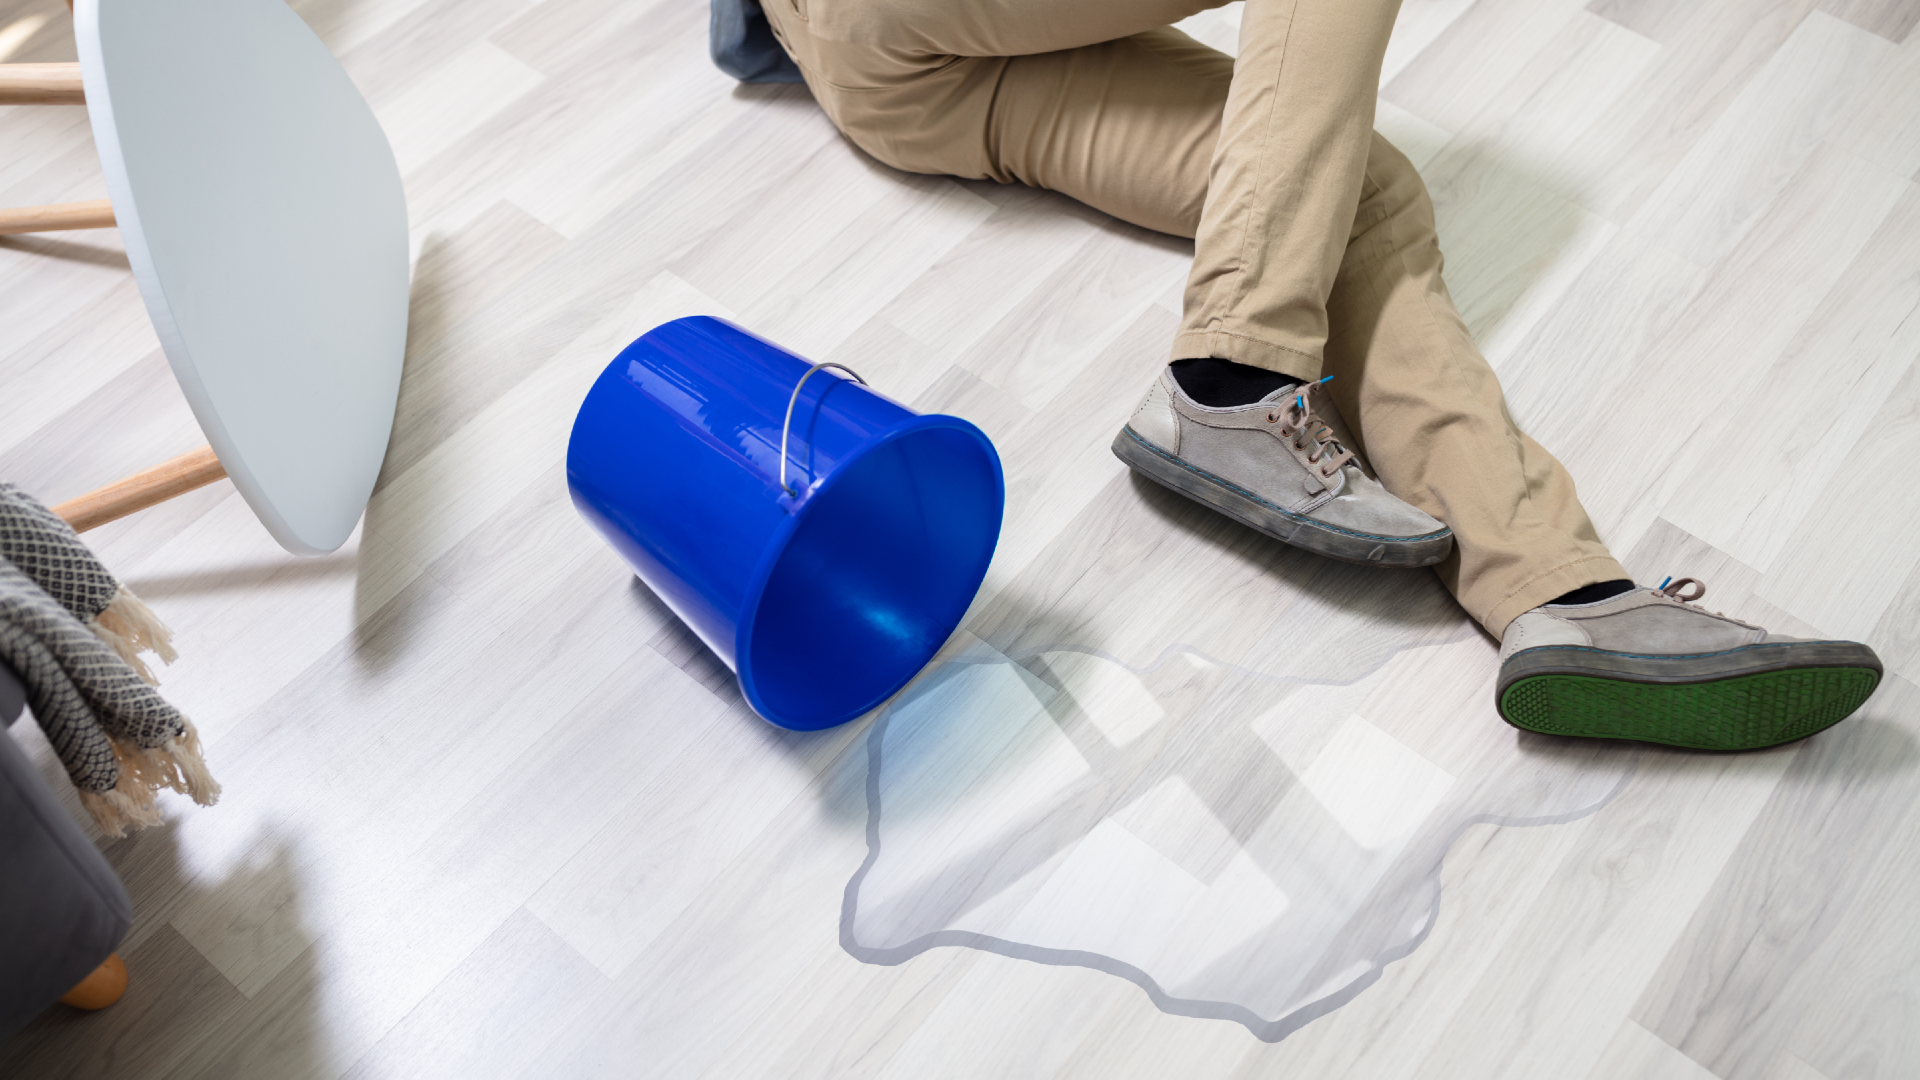 A slip-and-fall accident where a person is lying on the floor next to a spilled bucket